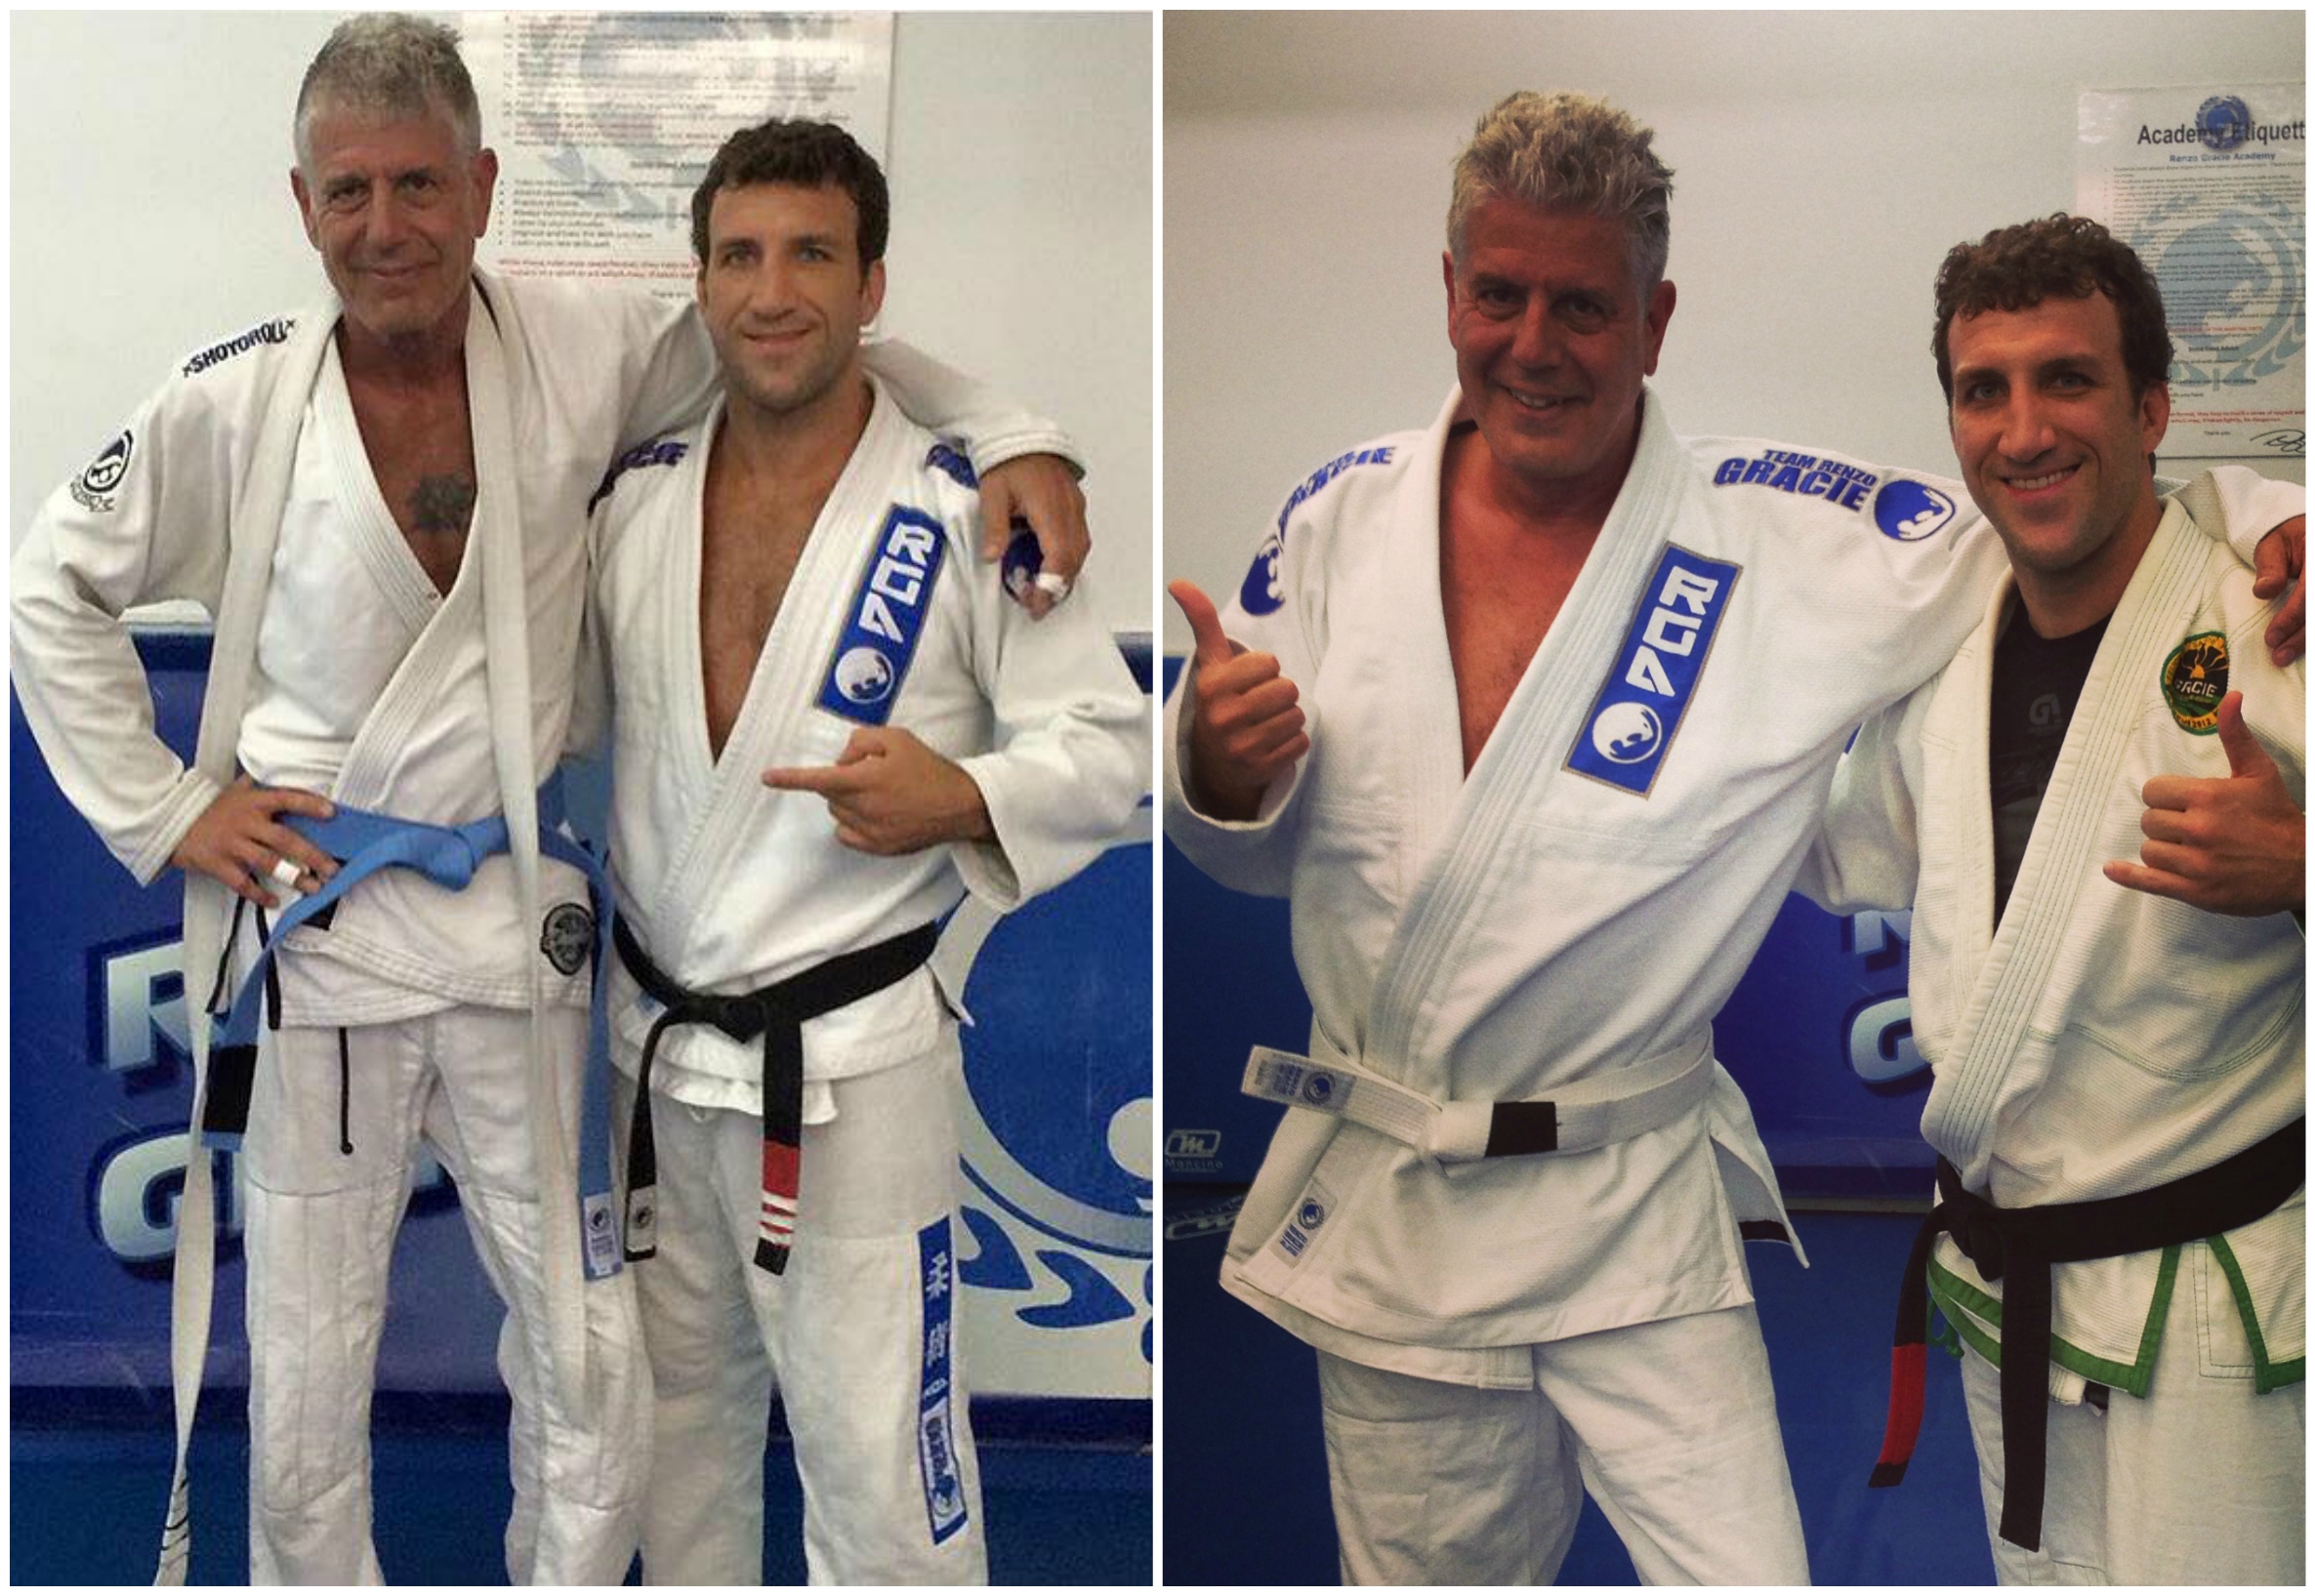 TV Chef Anthony Bourdain: BJJ Blue Belt After 2 Years of Training & Losing 30lbs